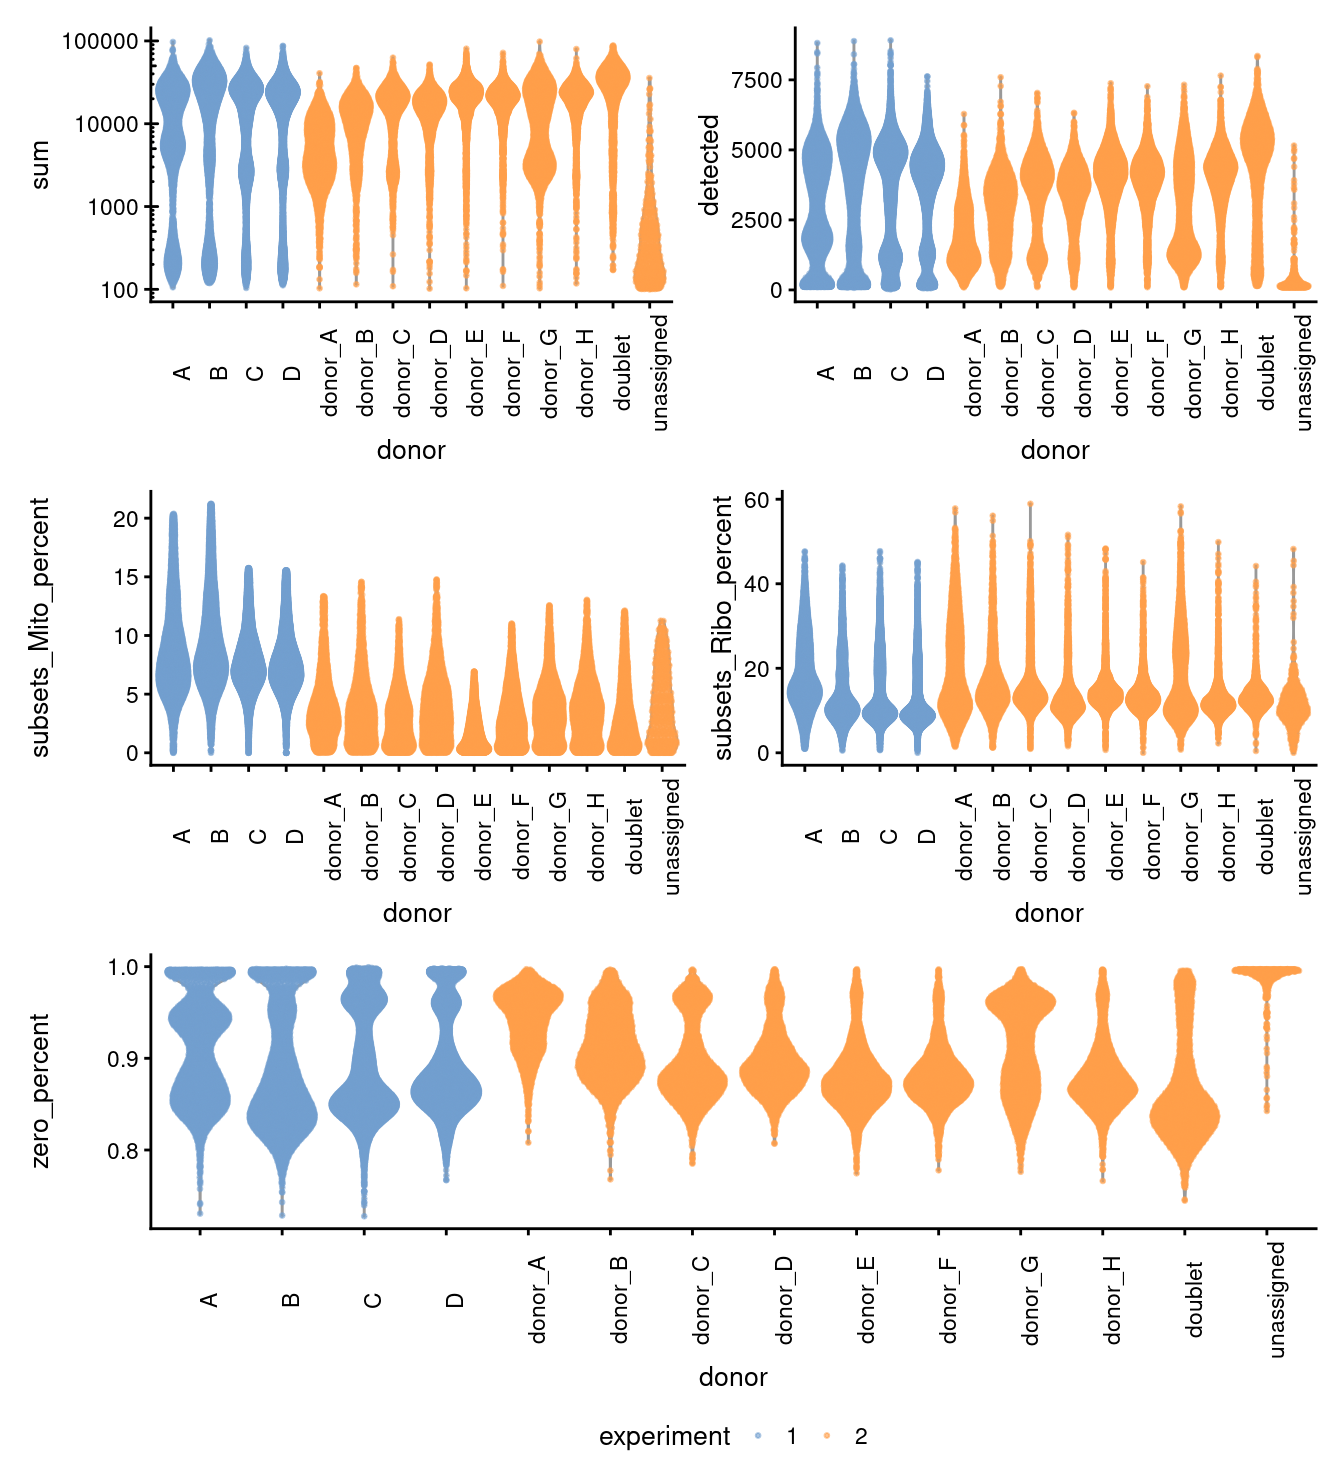 Distributions of various QC metrics for all cells in the dataset. This includes the library sizes, number of genes detected, and percentage of reads mapped to mitochondrial genes.